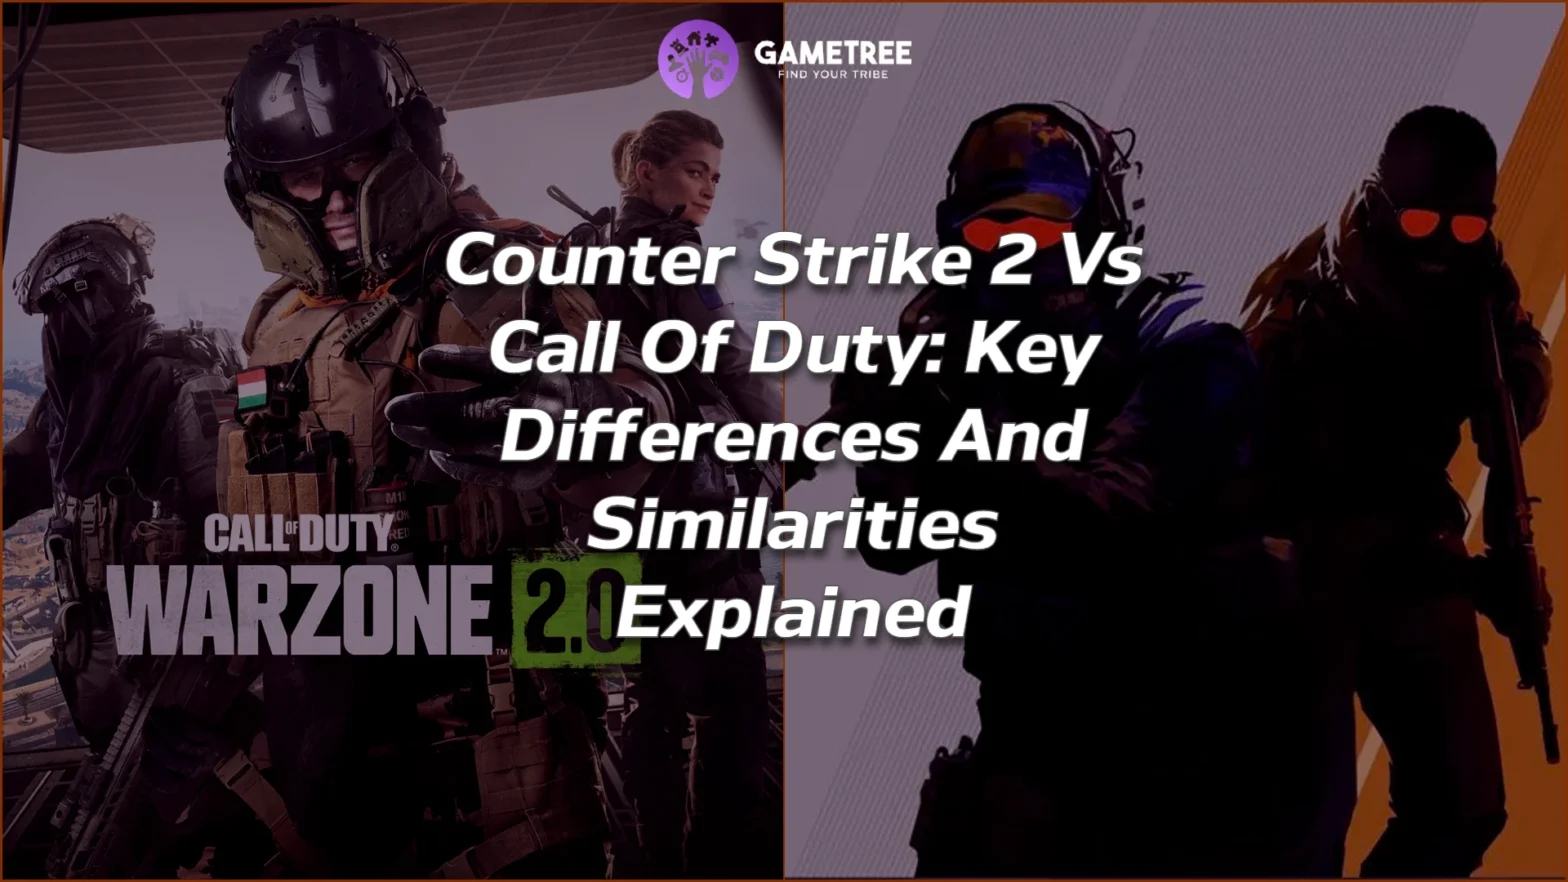 Call of Duty and Counter-Strike 2, two giants in the FPS (first-person shooter) genre, are extremely popular on all continents right now.